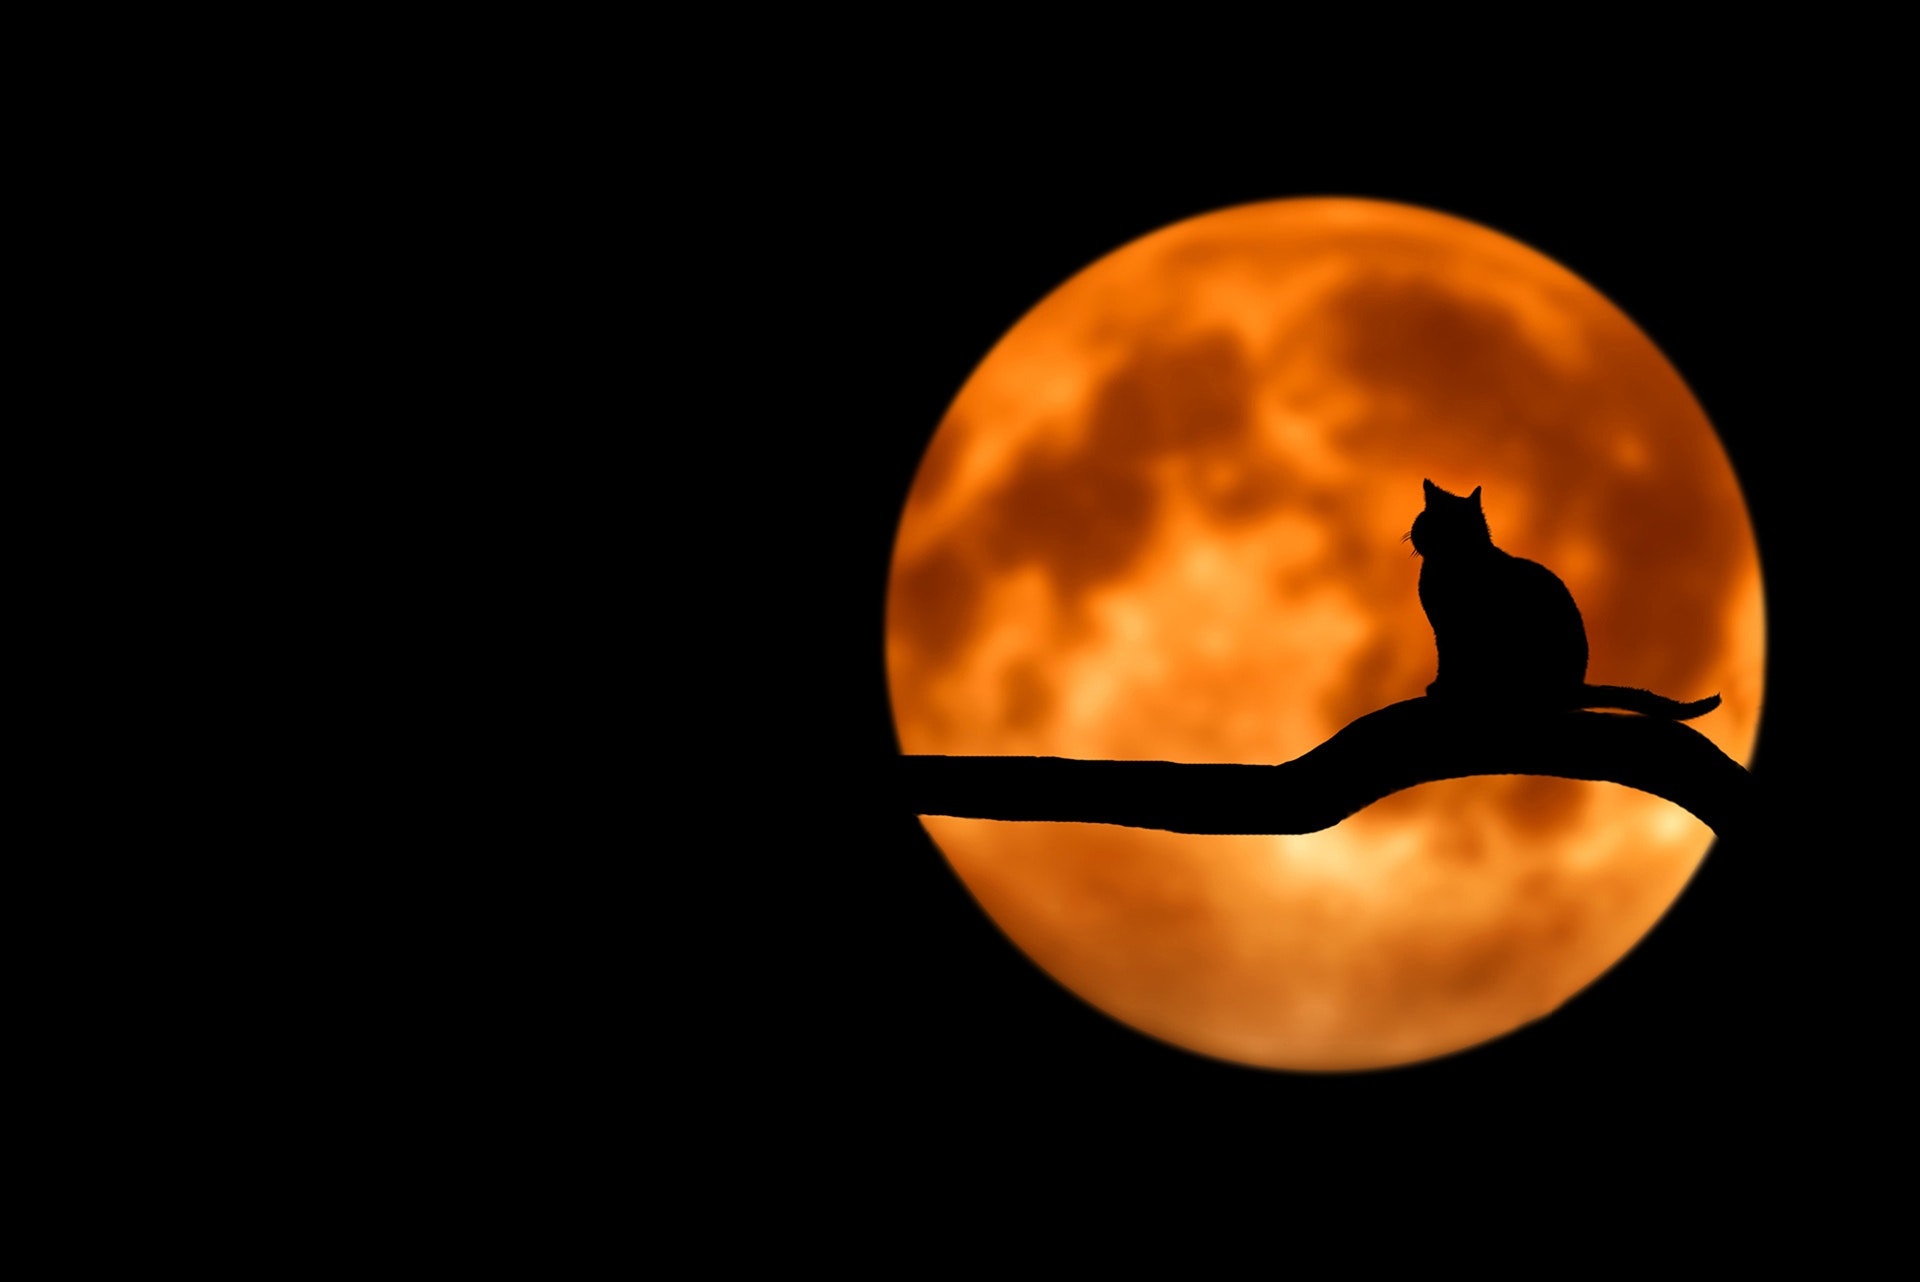 Full orange moon with a silhouette of a cat on a branch.